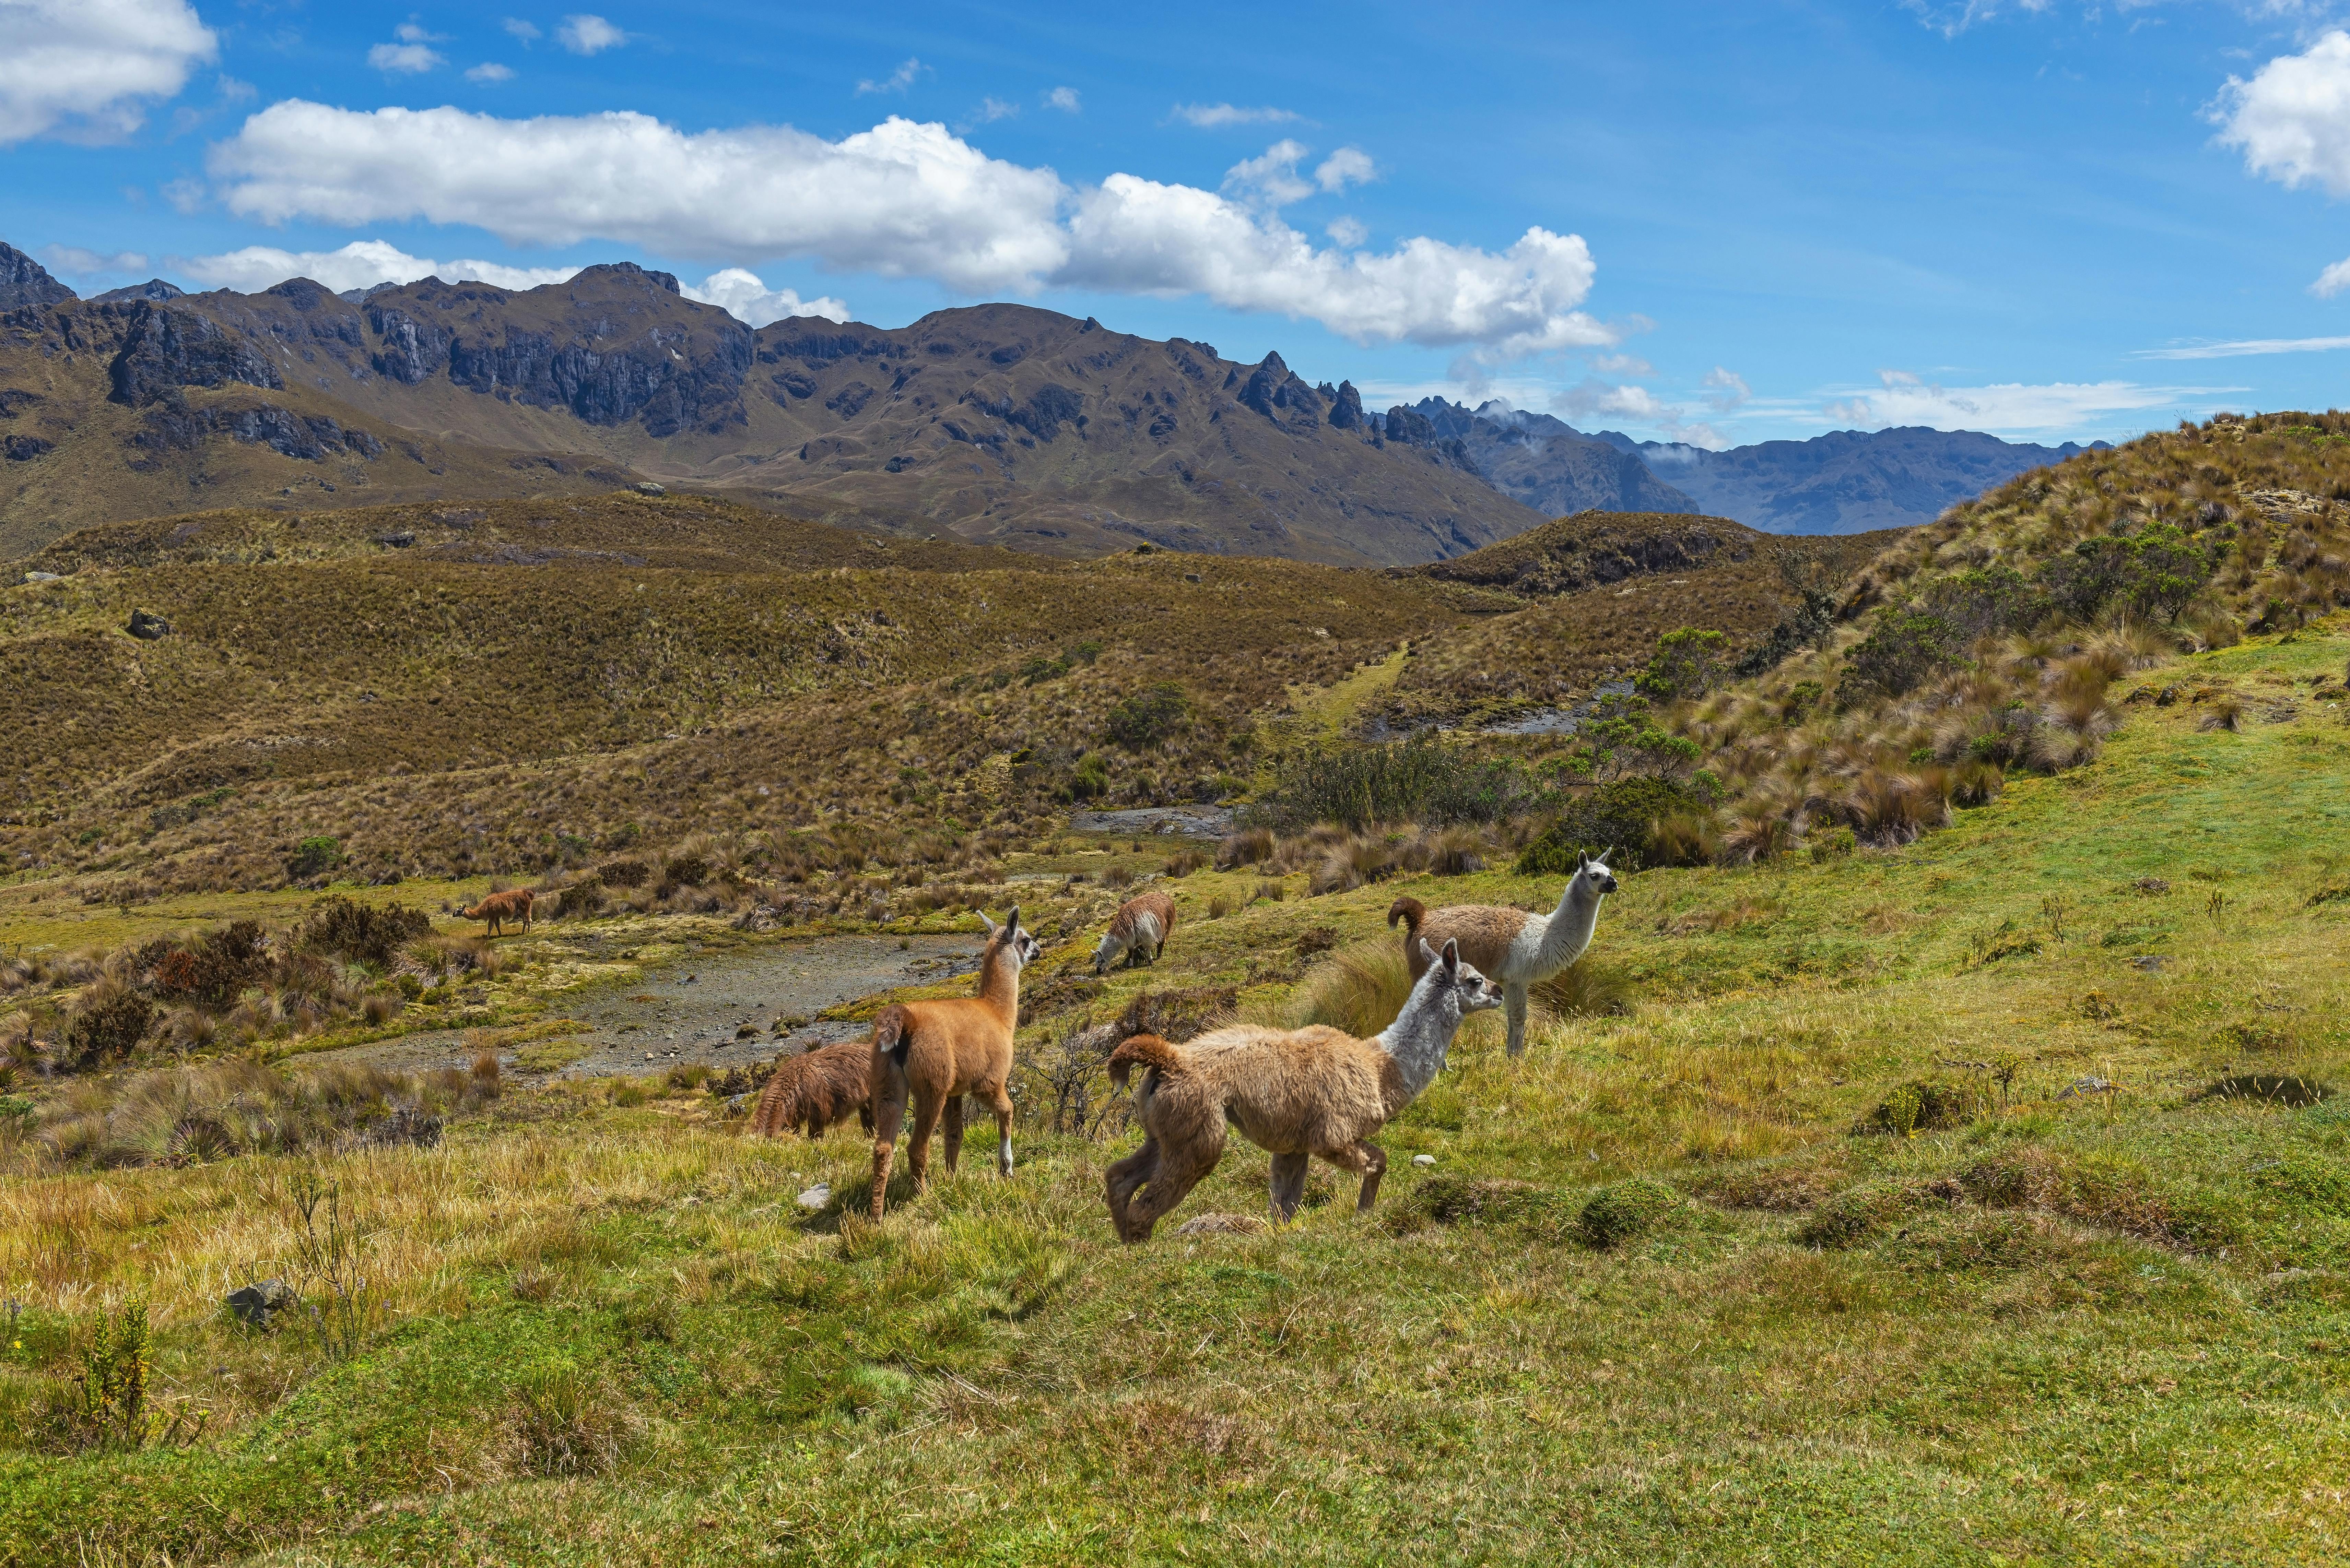 Cajas National Park tour with cocoa farm visit from Guayaquil or Cuenca